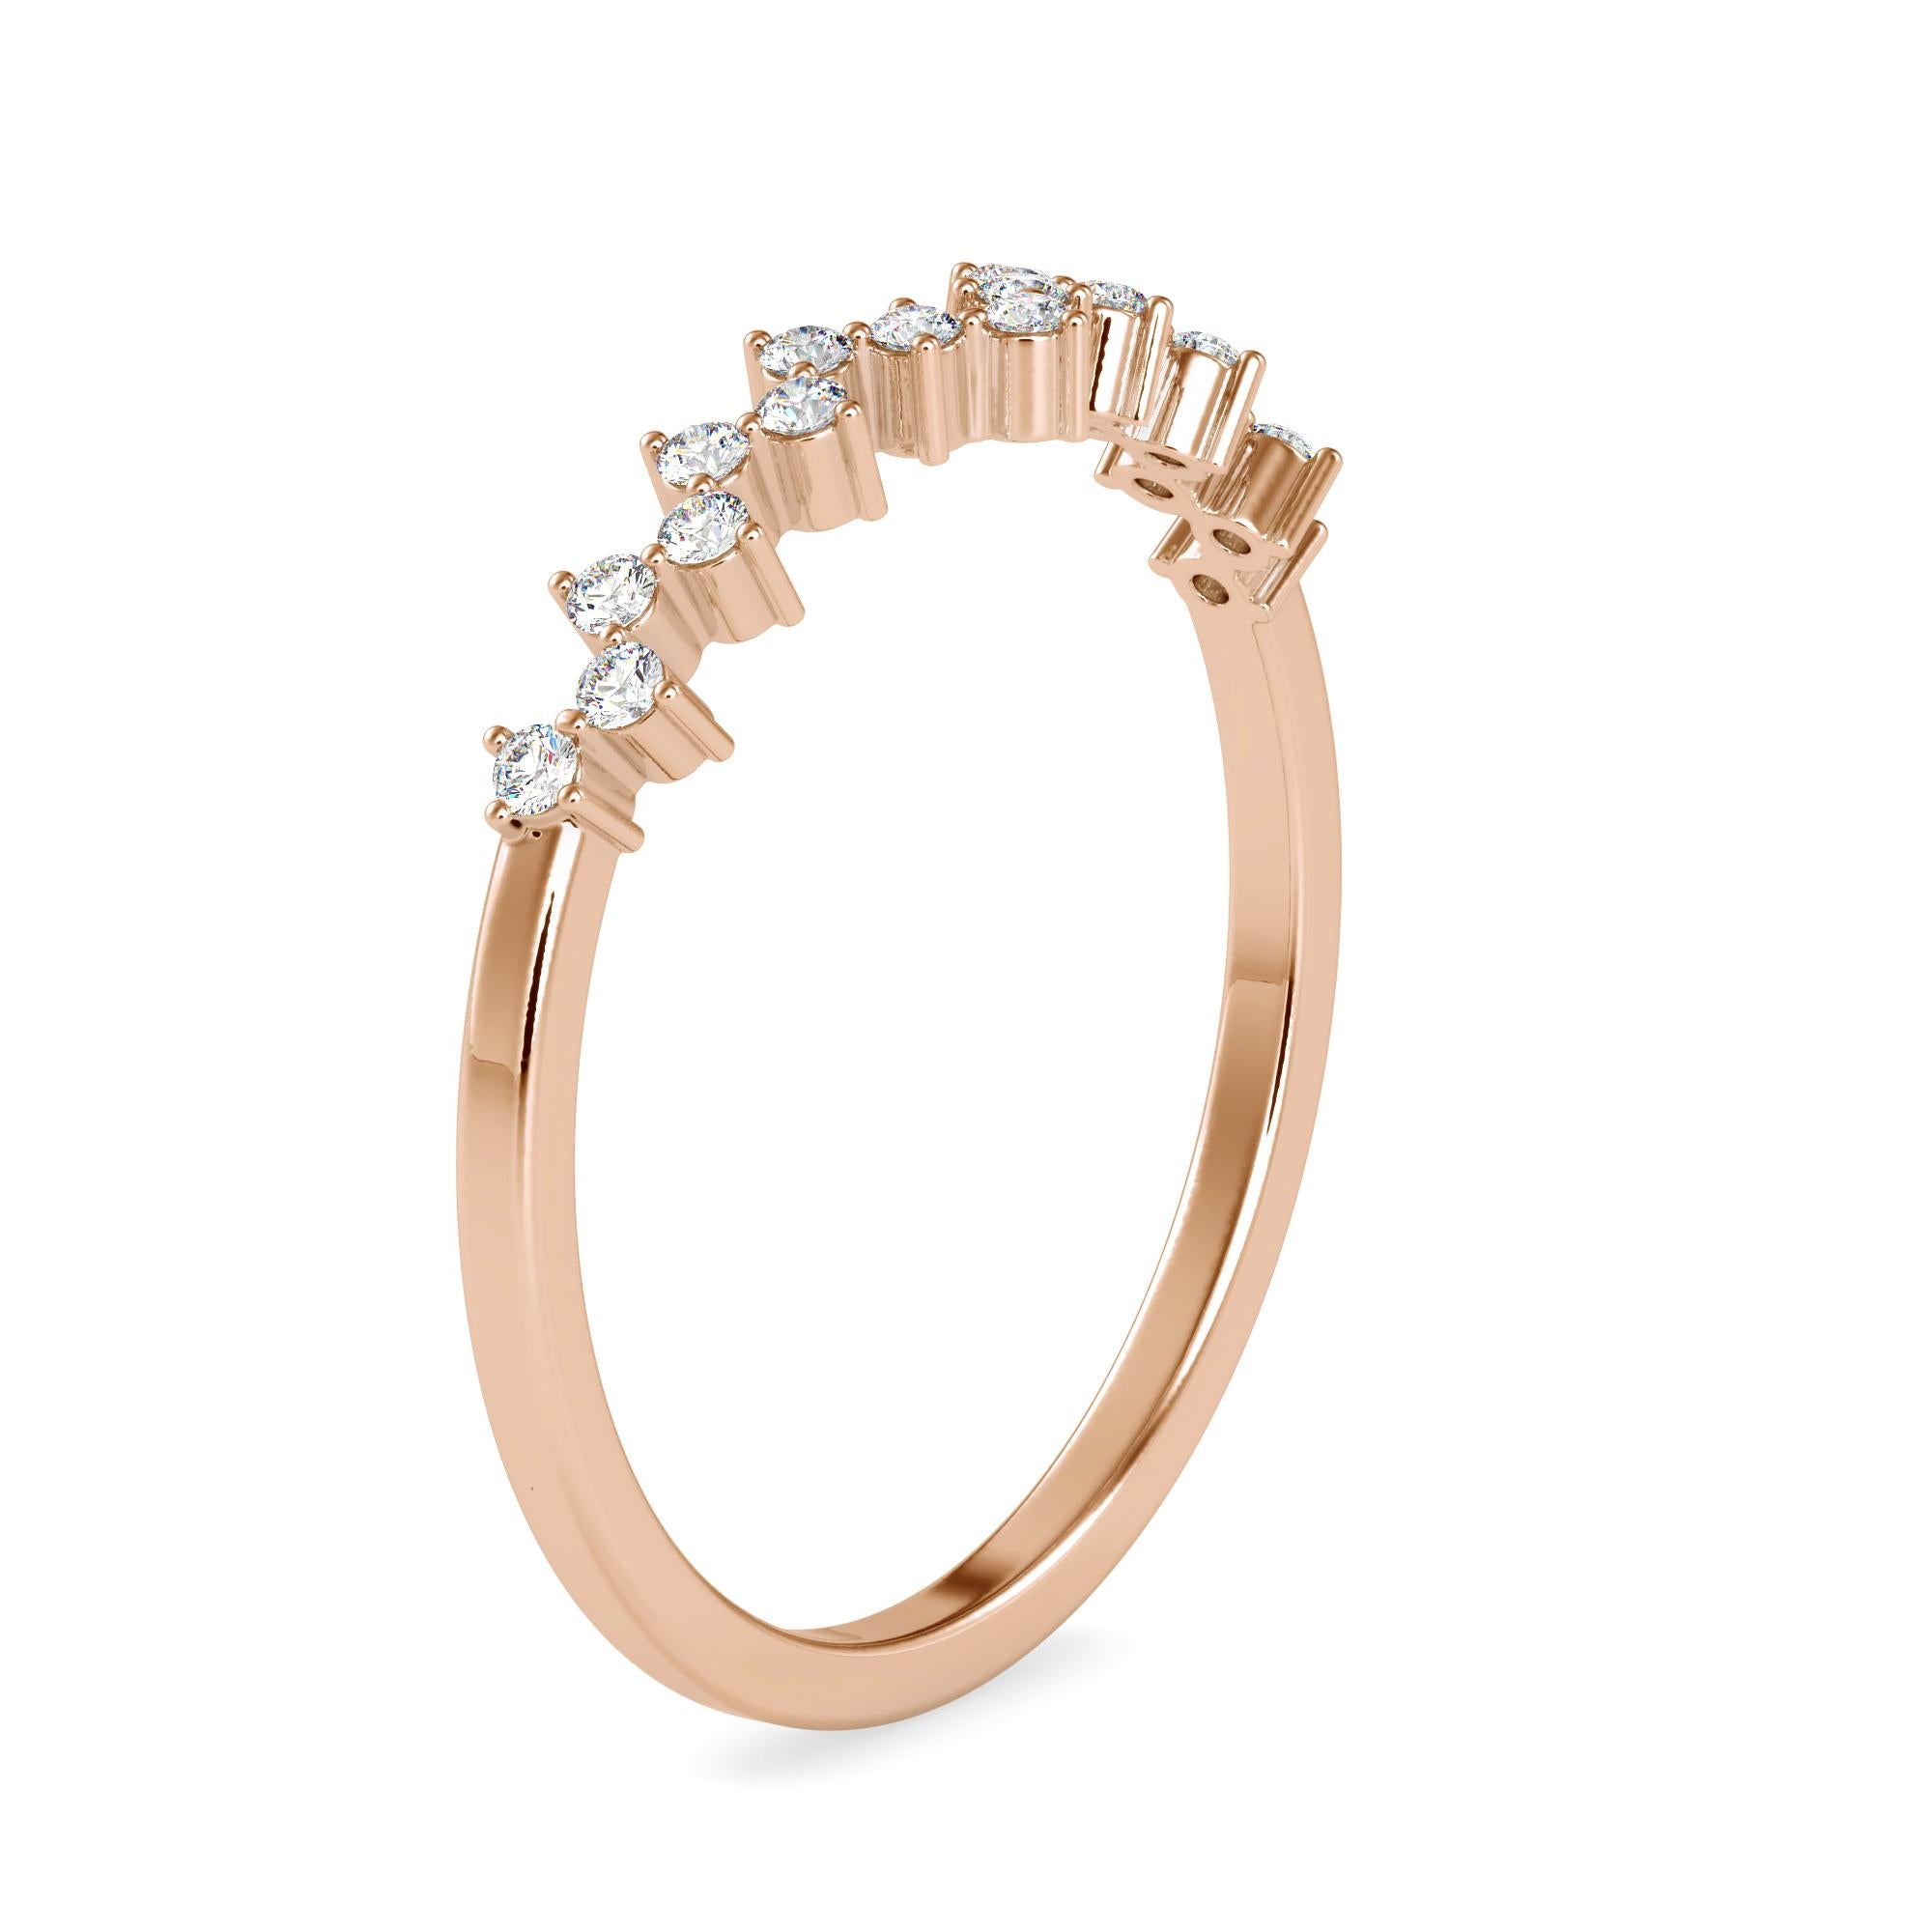 0.11 Carat Diamond 14K Rose Gold Ring In New Condition For Sale In Los Angeles, CA